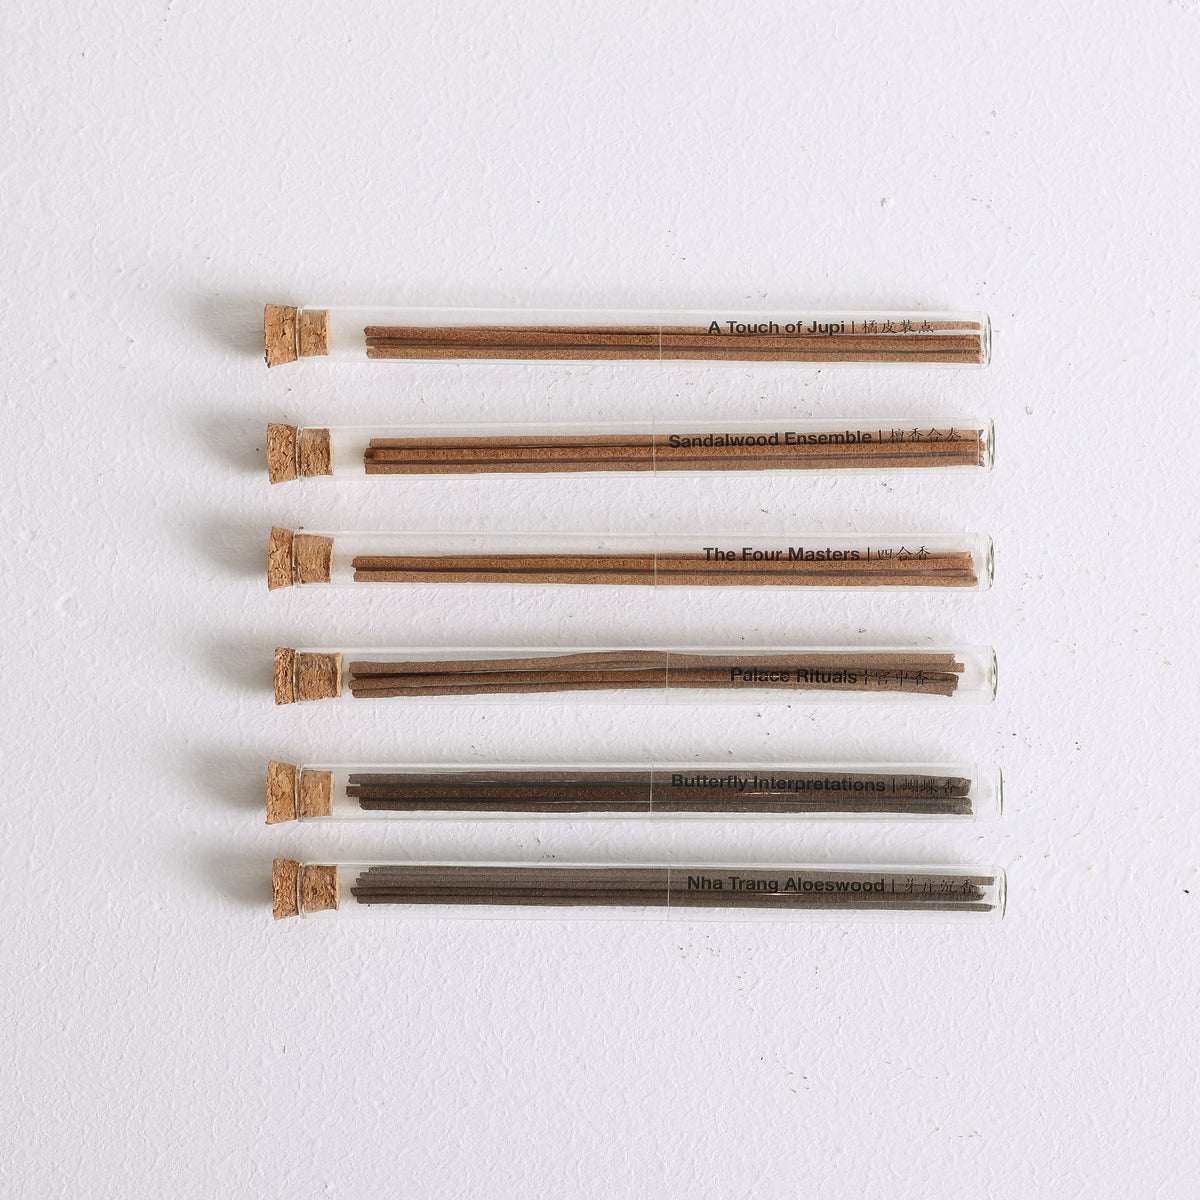 6 tubes of handmade all natural incense sticks by Kin Objects